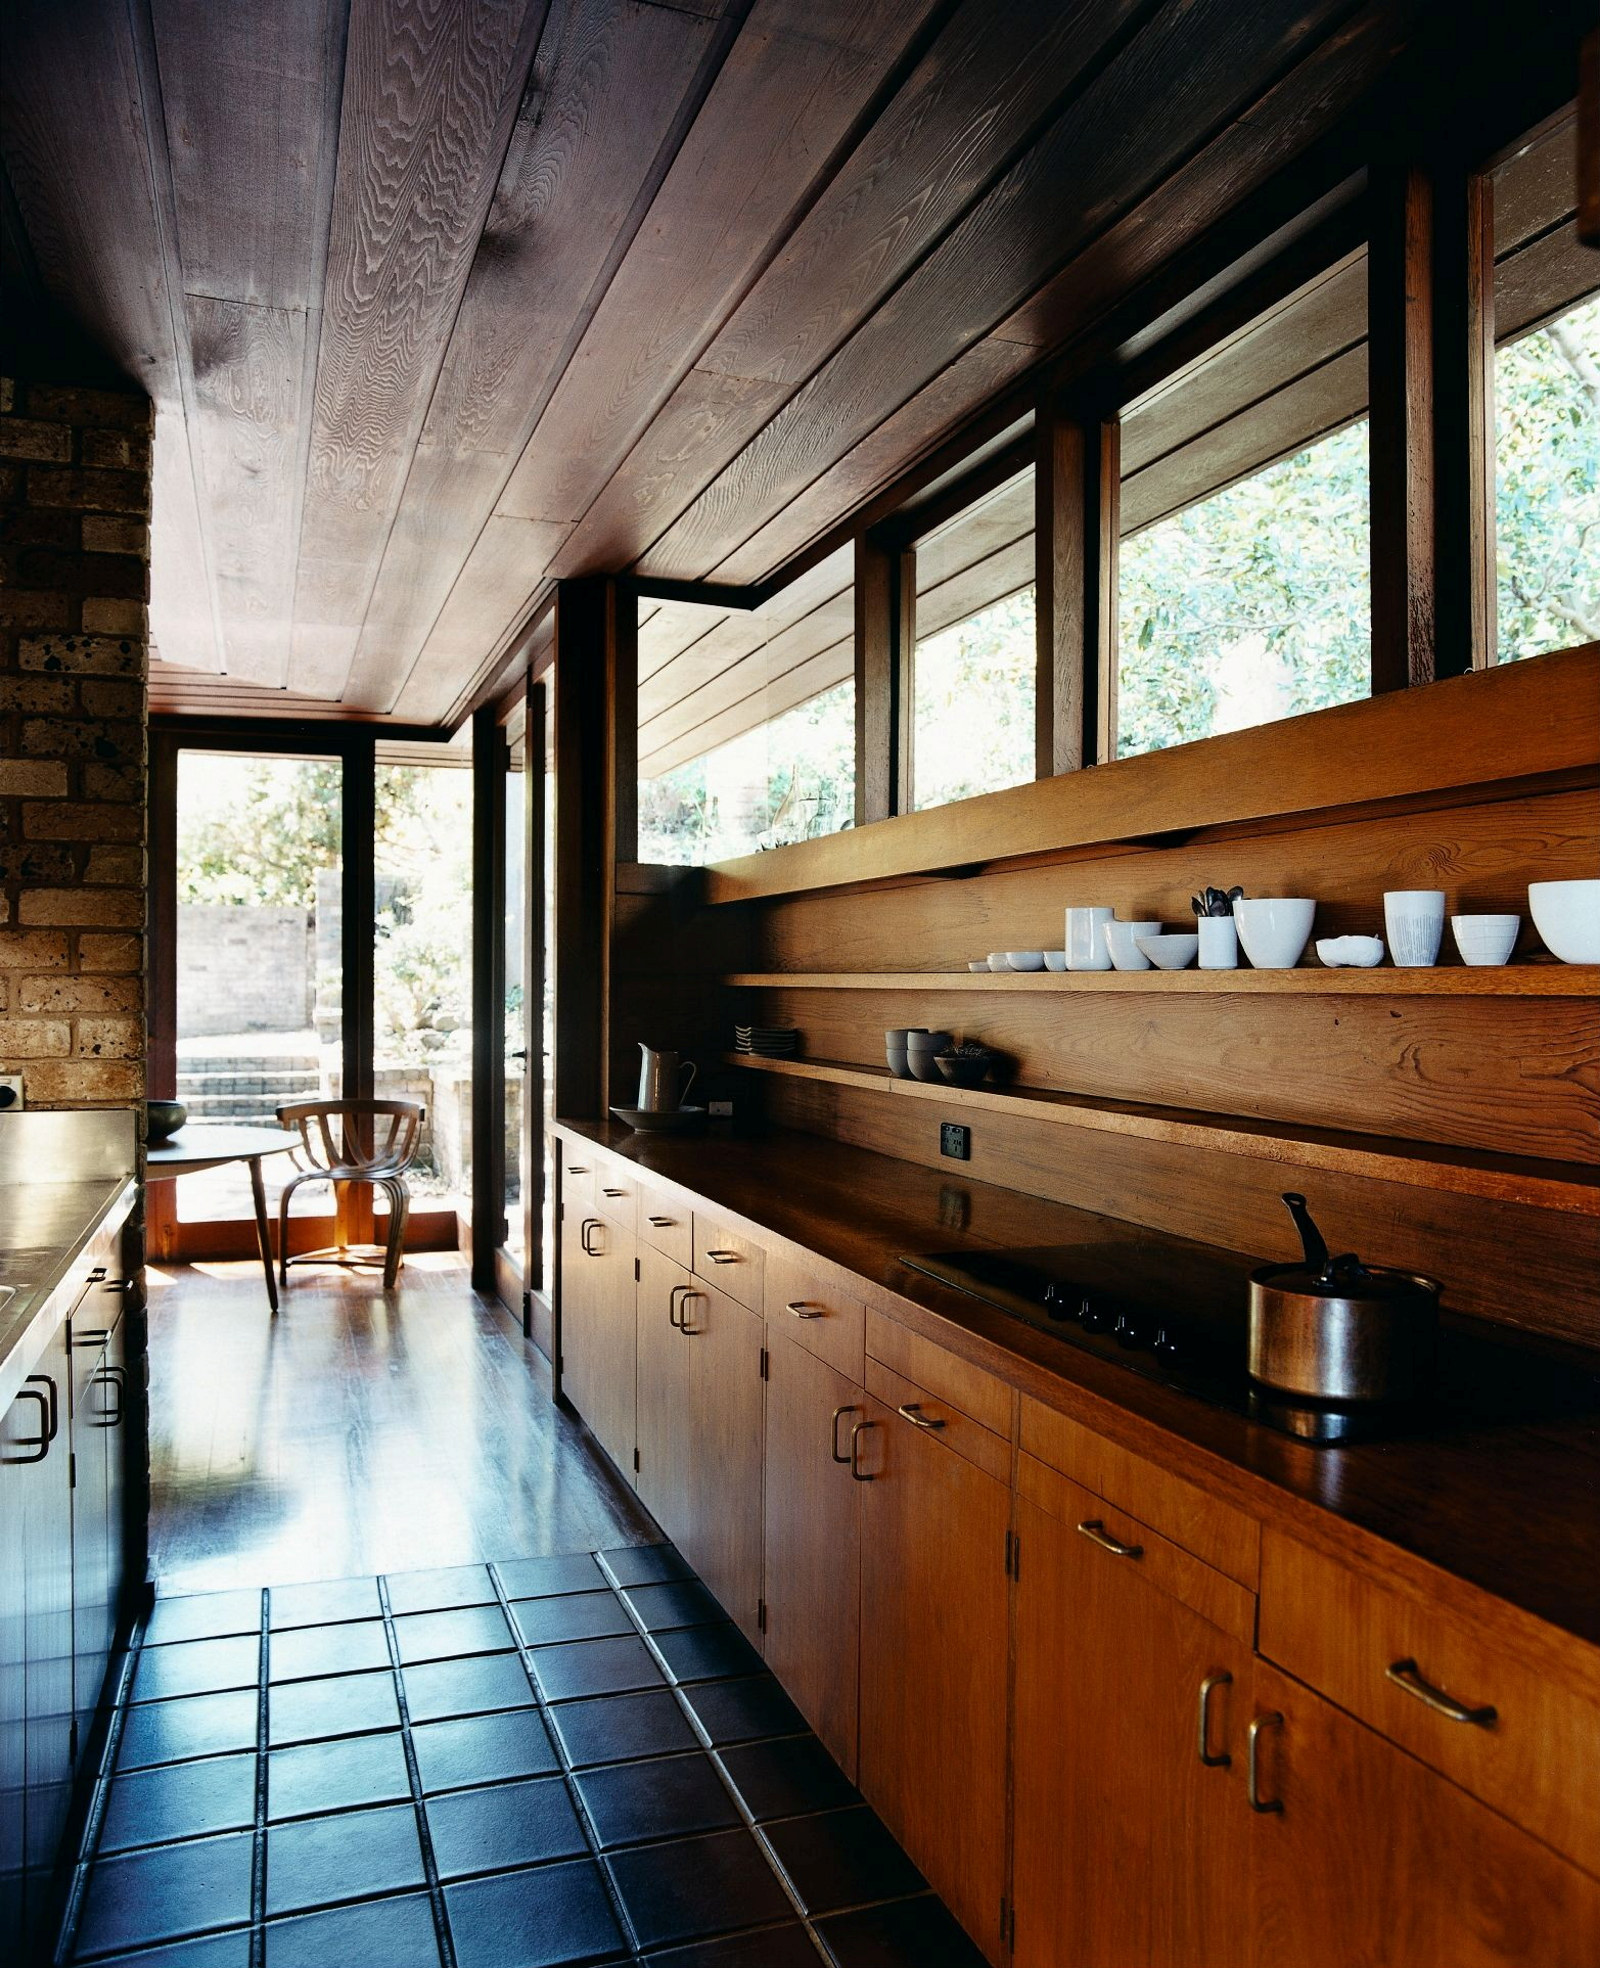 This is a photograph of a gallery style kitchen with a tiled floor. Timber is used for the ceiling, cupboards and benches.